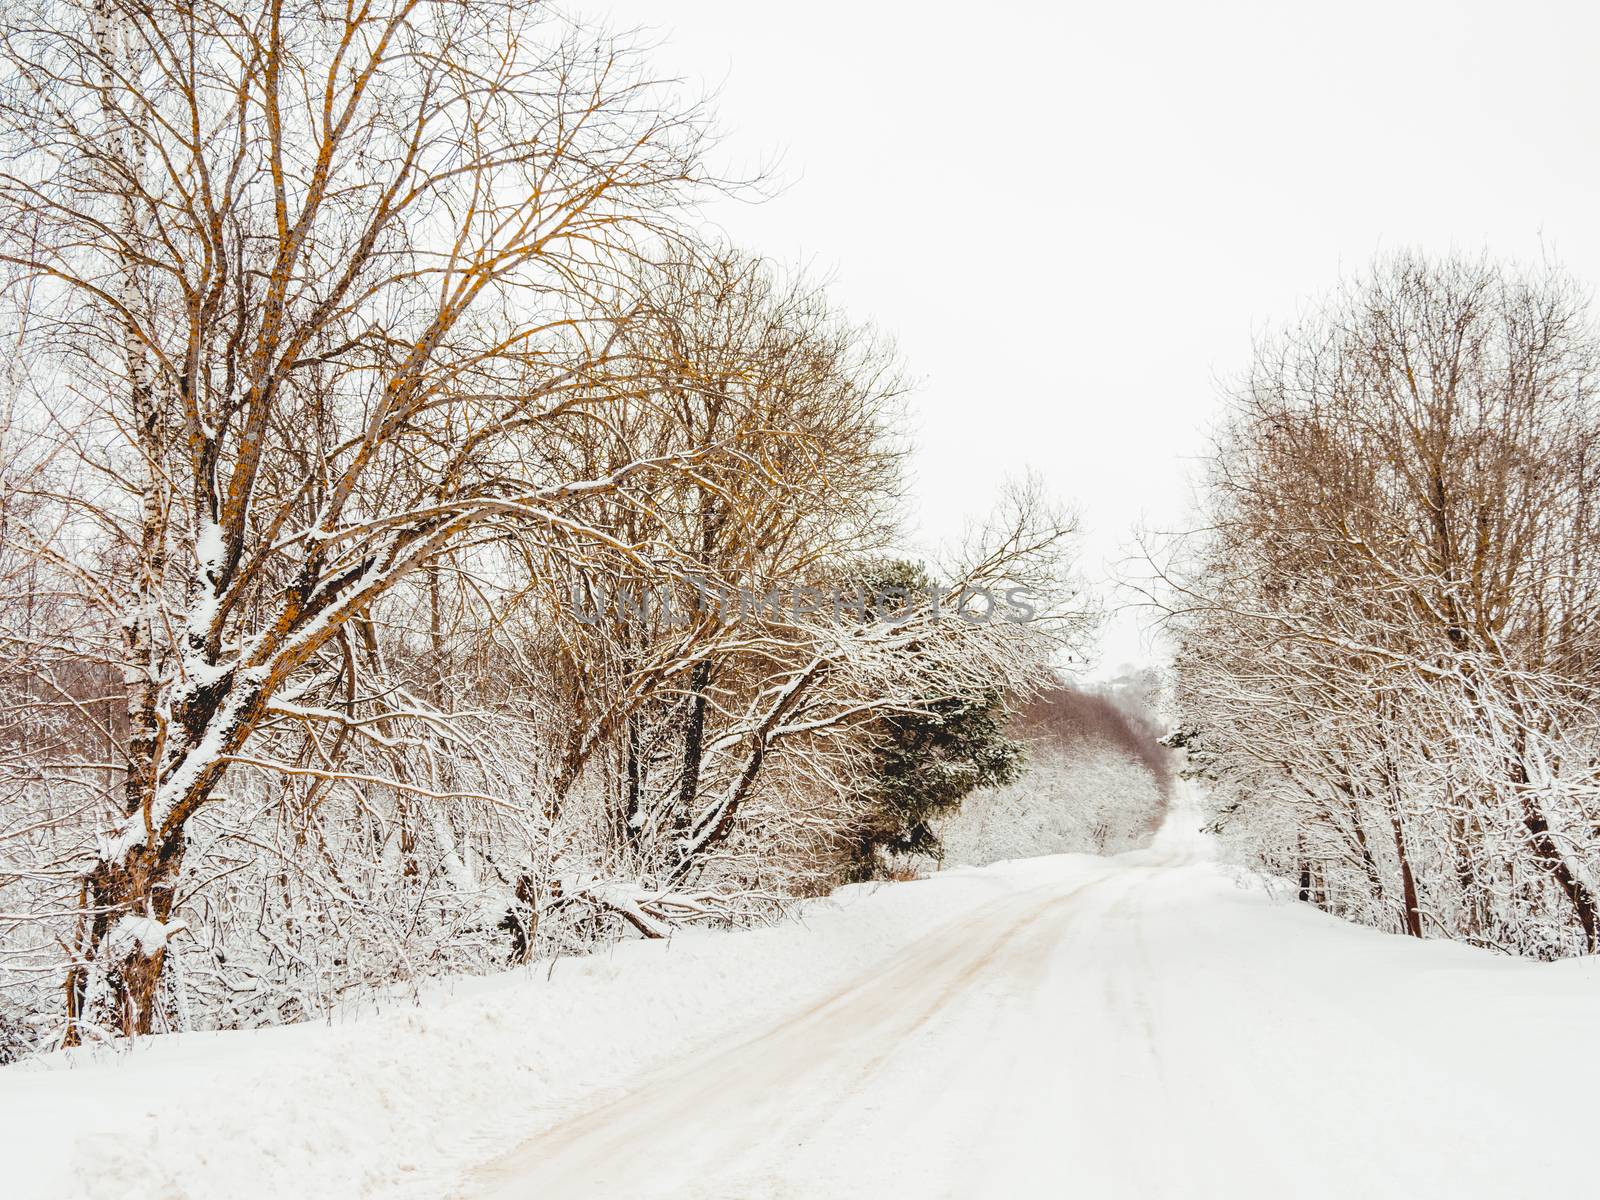 Winter natural background with trees and country road under the snow. Rural landscape. Countryside.